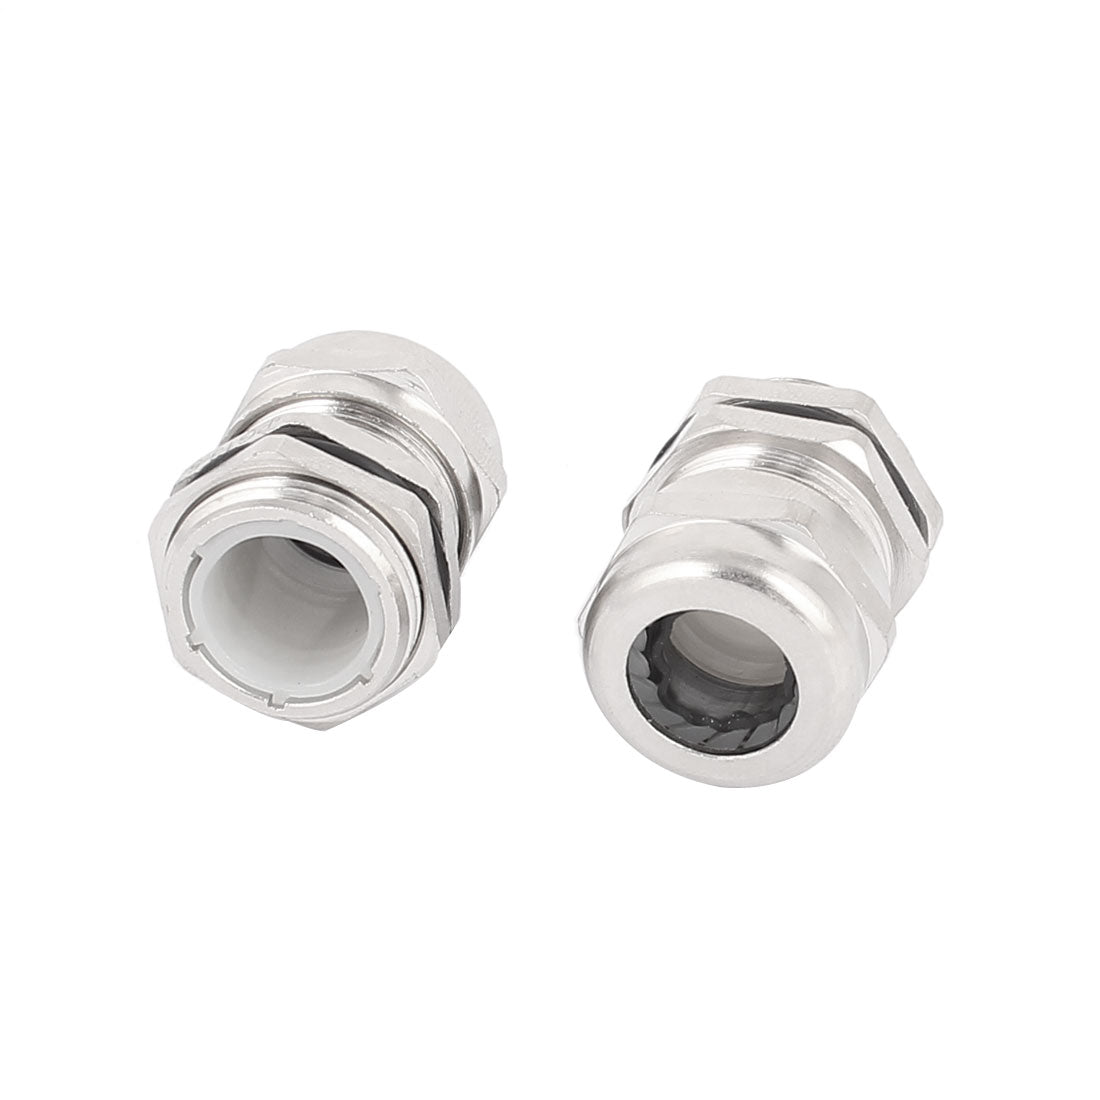 uxcell Uxcell 2 Pcs 20mm Dia Thread PG13.5 Water Resistant Stainless Steel Cable Gland Joint Silver Tone